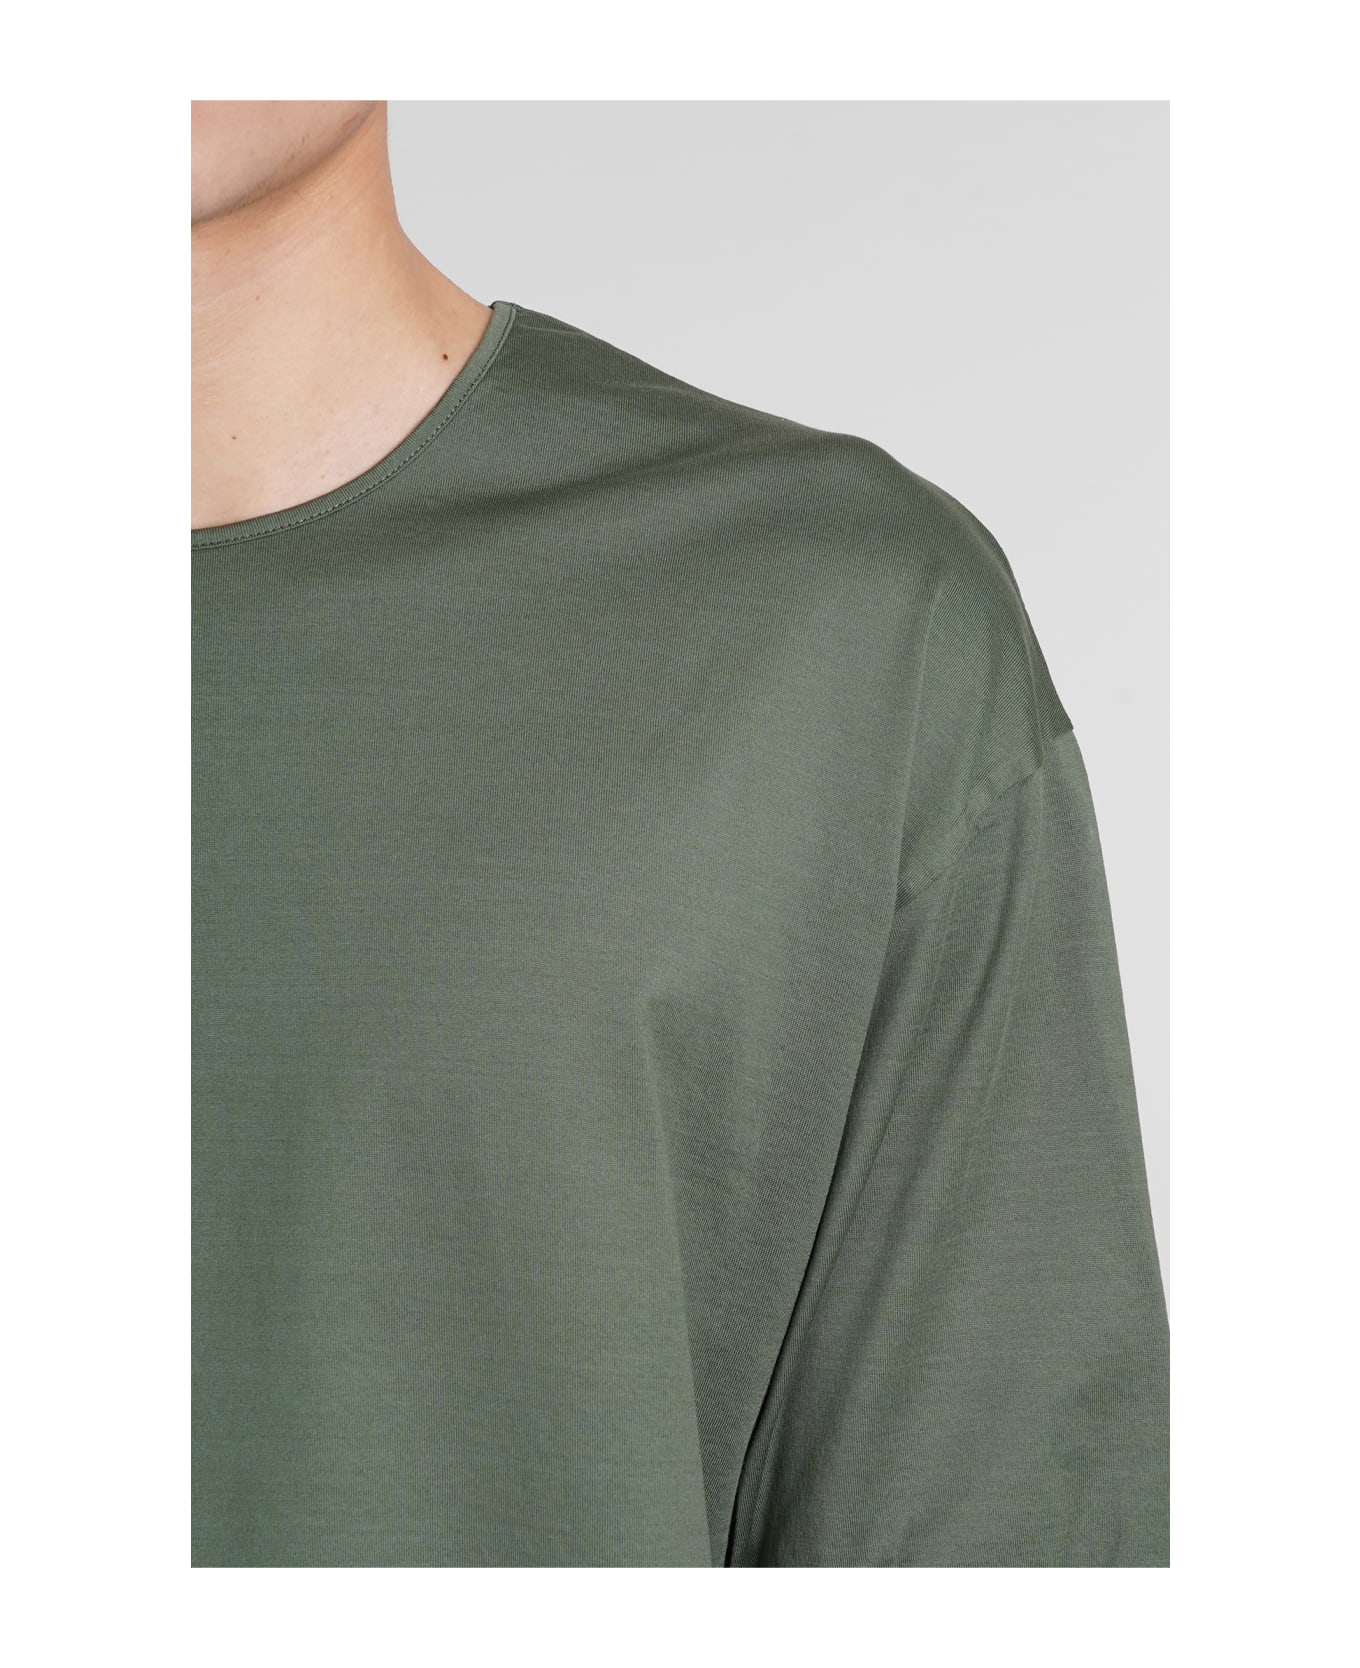 Lemaire T-shirt In Green Cotton - green シャツ